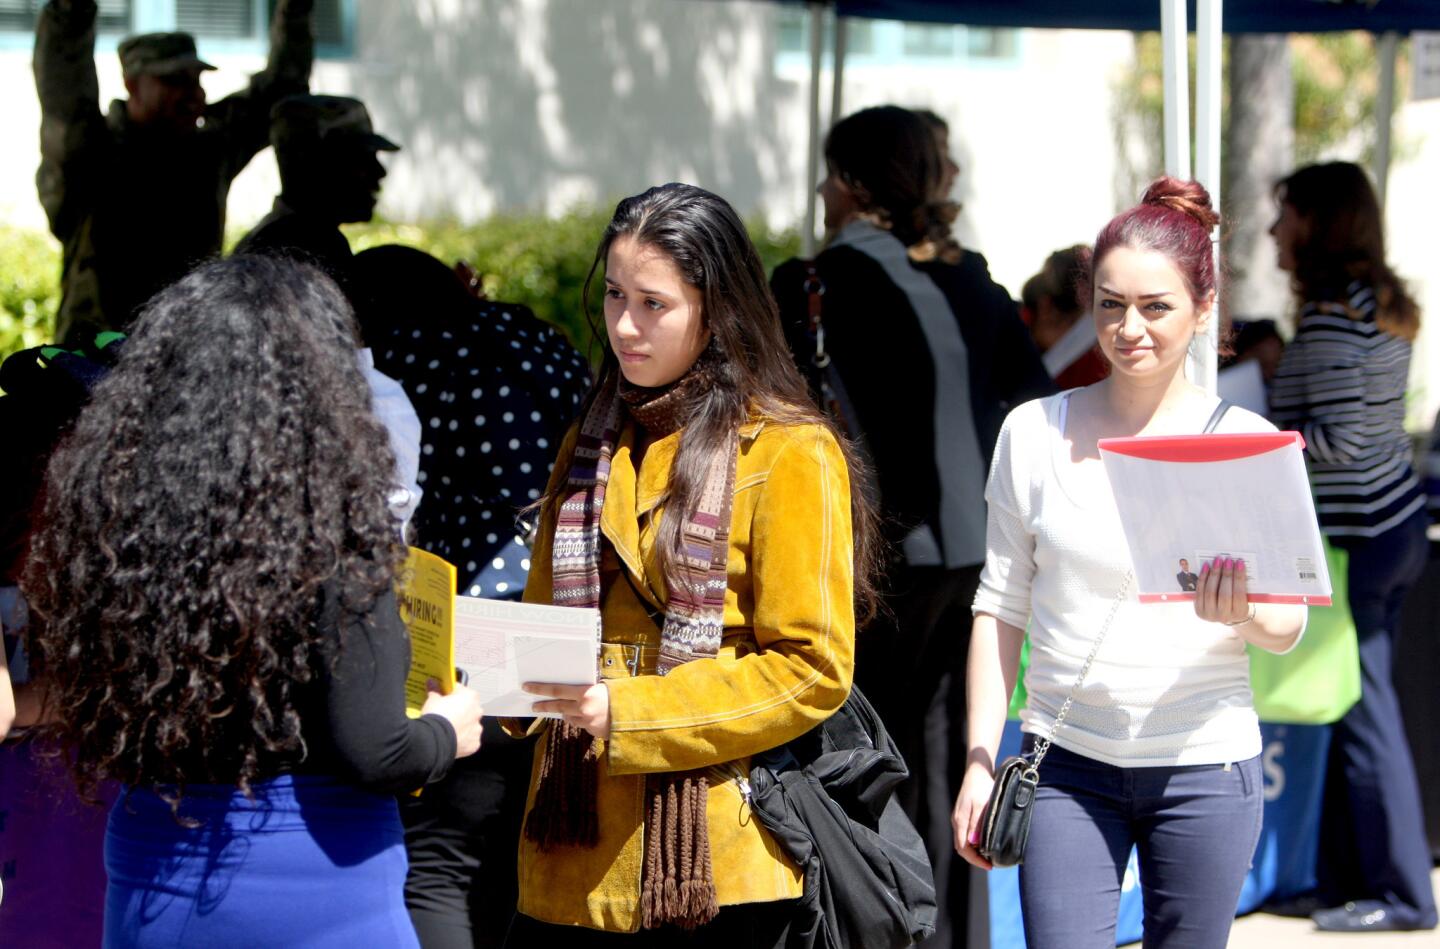 Nursing student Betsaida Esqueda, center, speaks with a job recruiter at the Glendale College Spring Job Fair, on Campus at the college in Glendale on Thursday, March 30, 2017. About 90 employers had representatives offering a wide range of job opportunities from seasonal to part-time and full-time.